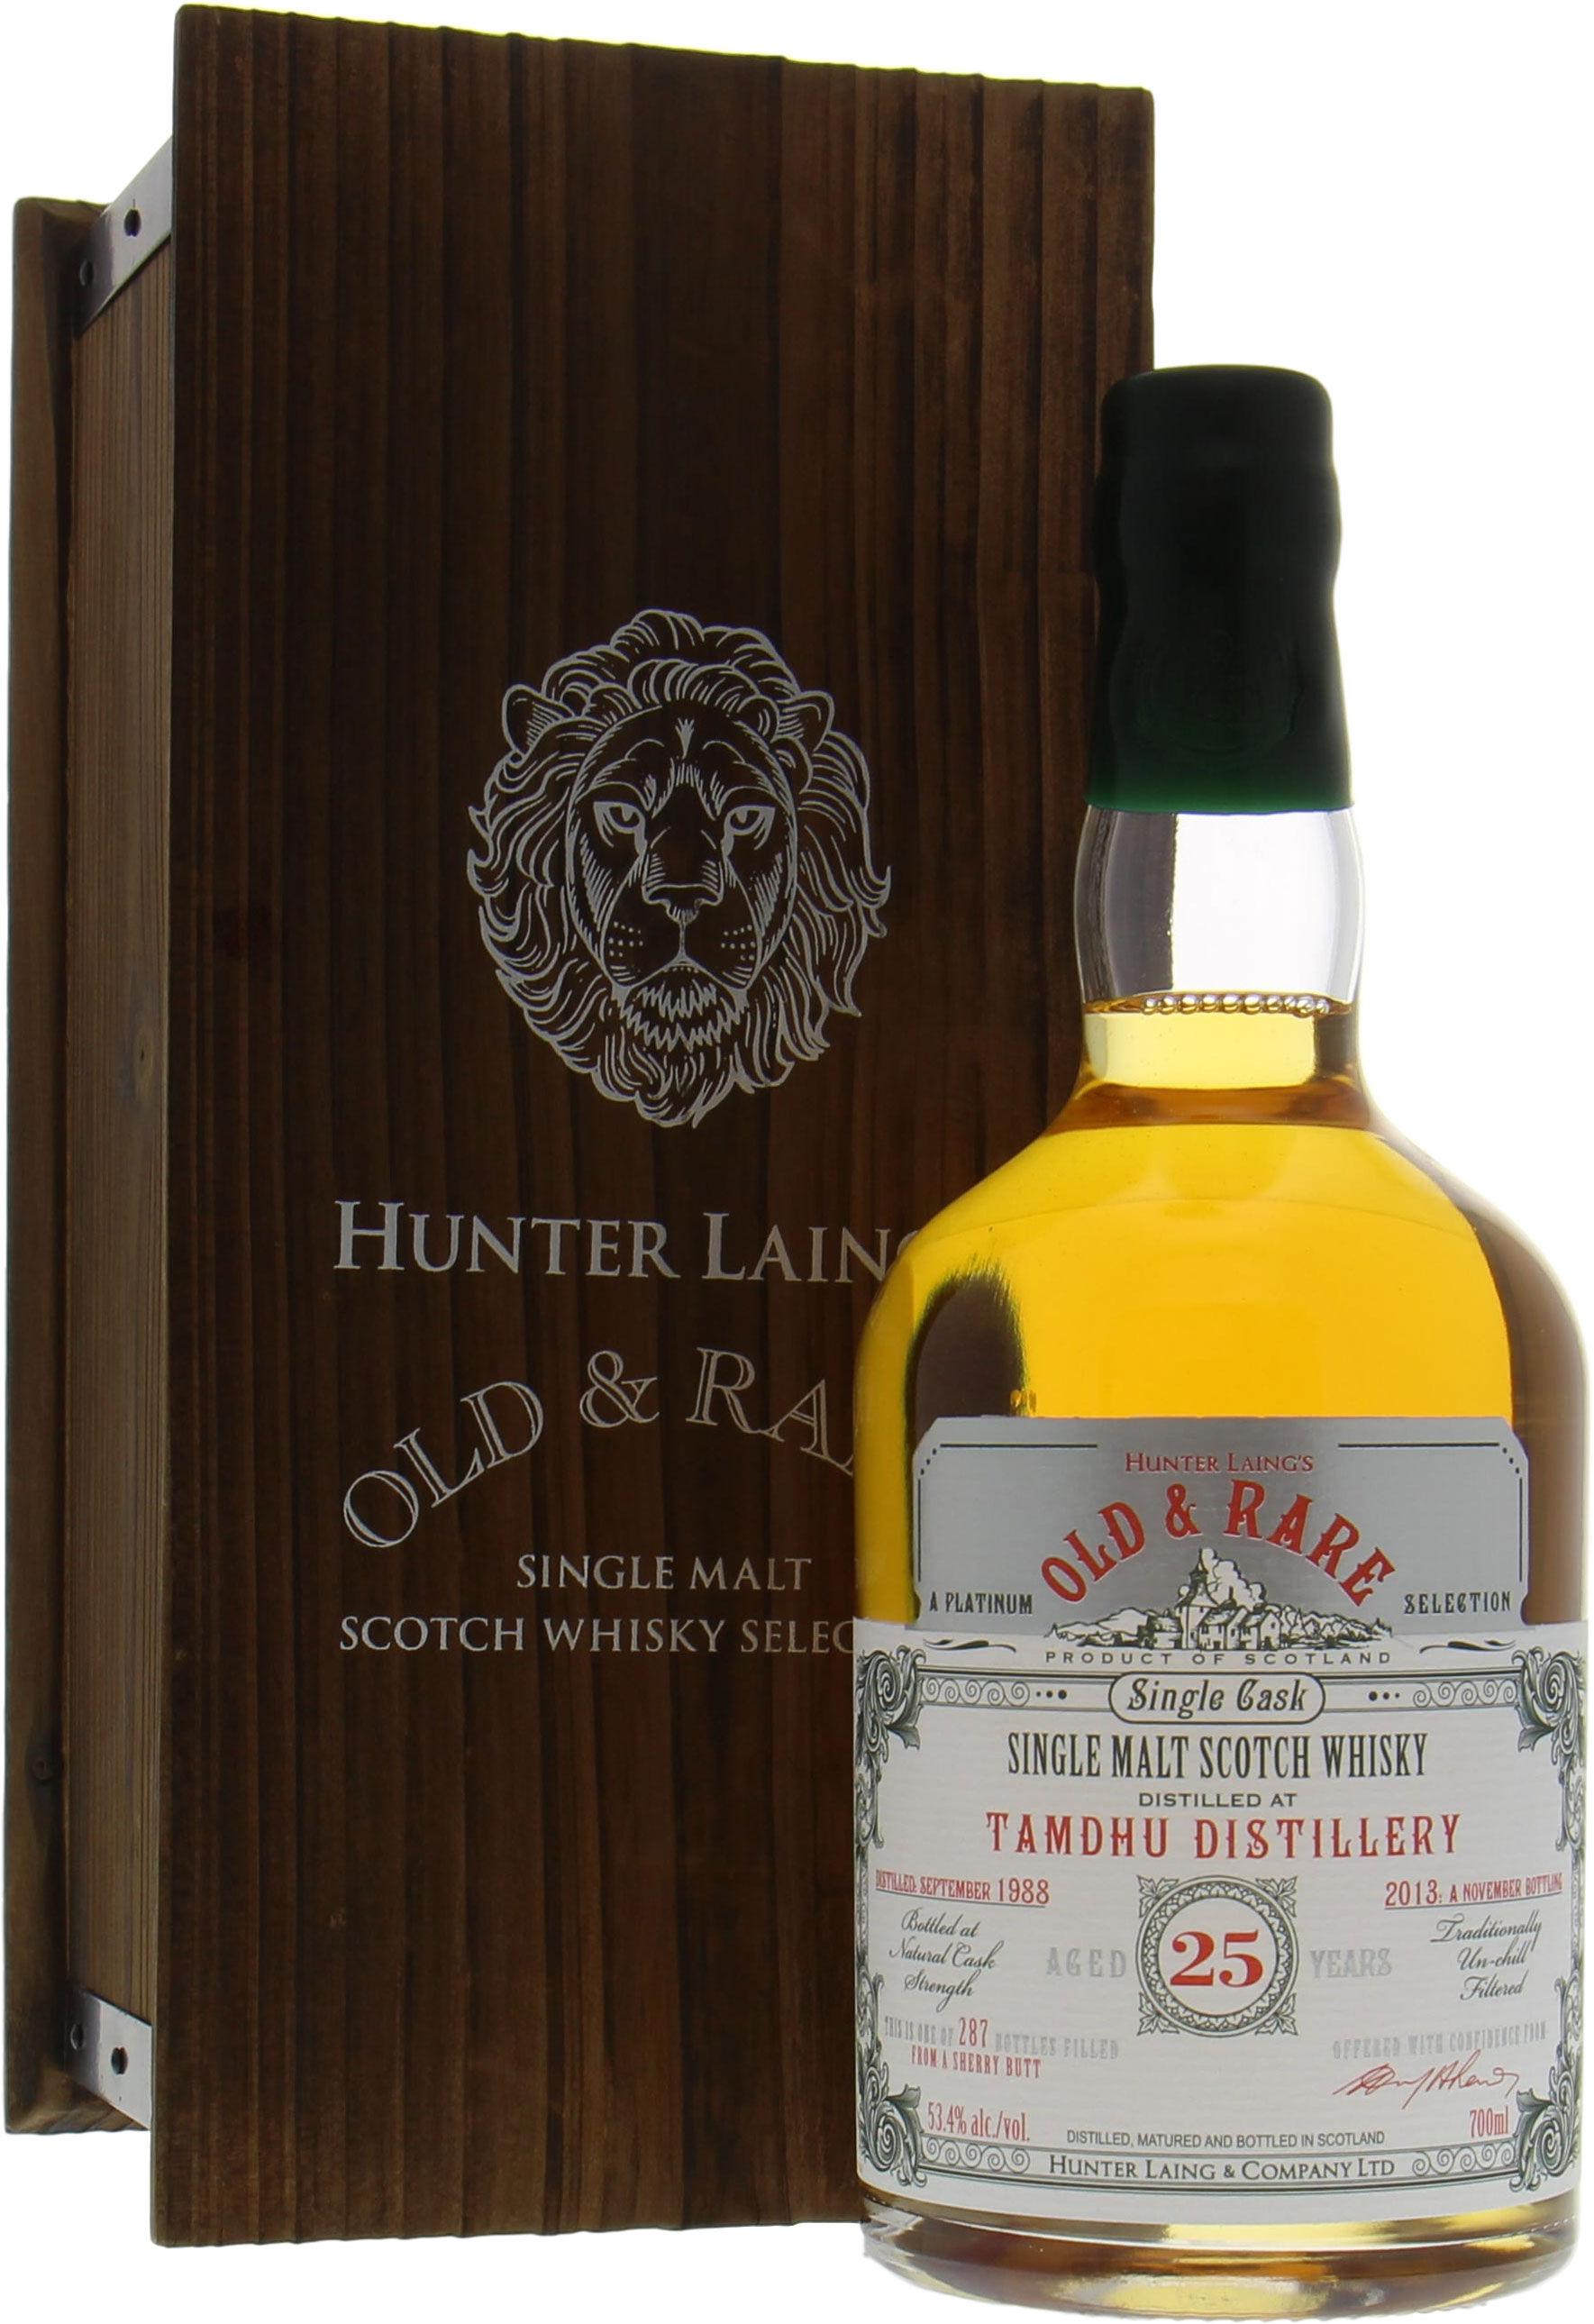 Tamdhu - 25 Years Old Old & Rare Hunter Laing's Platinum Selection 53.4% 1988 In Original Wooden Case